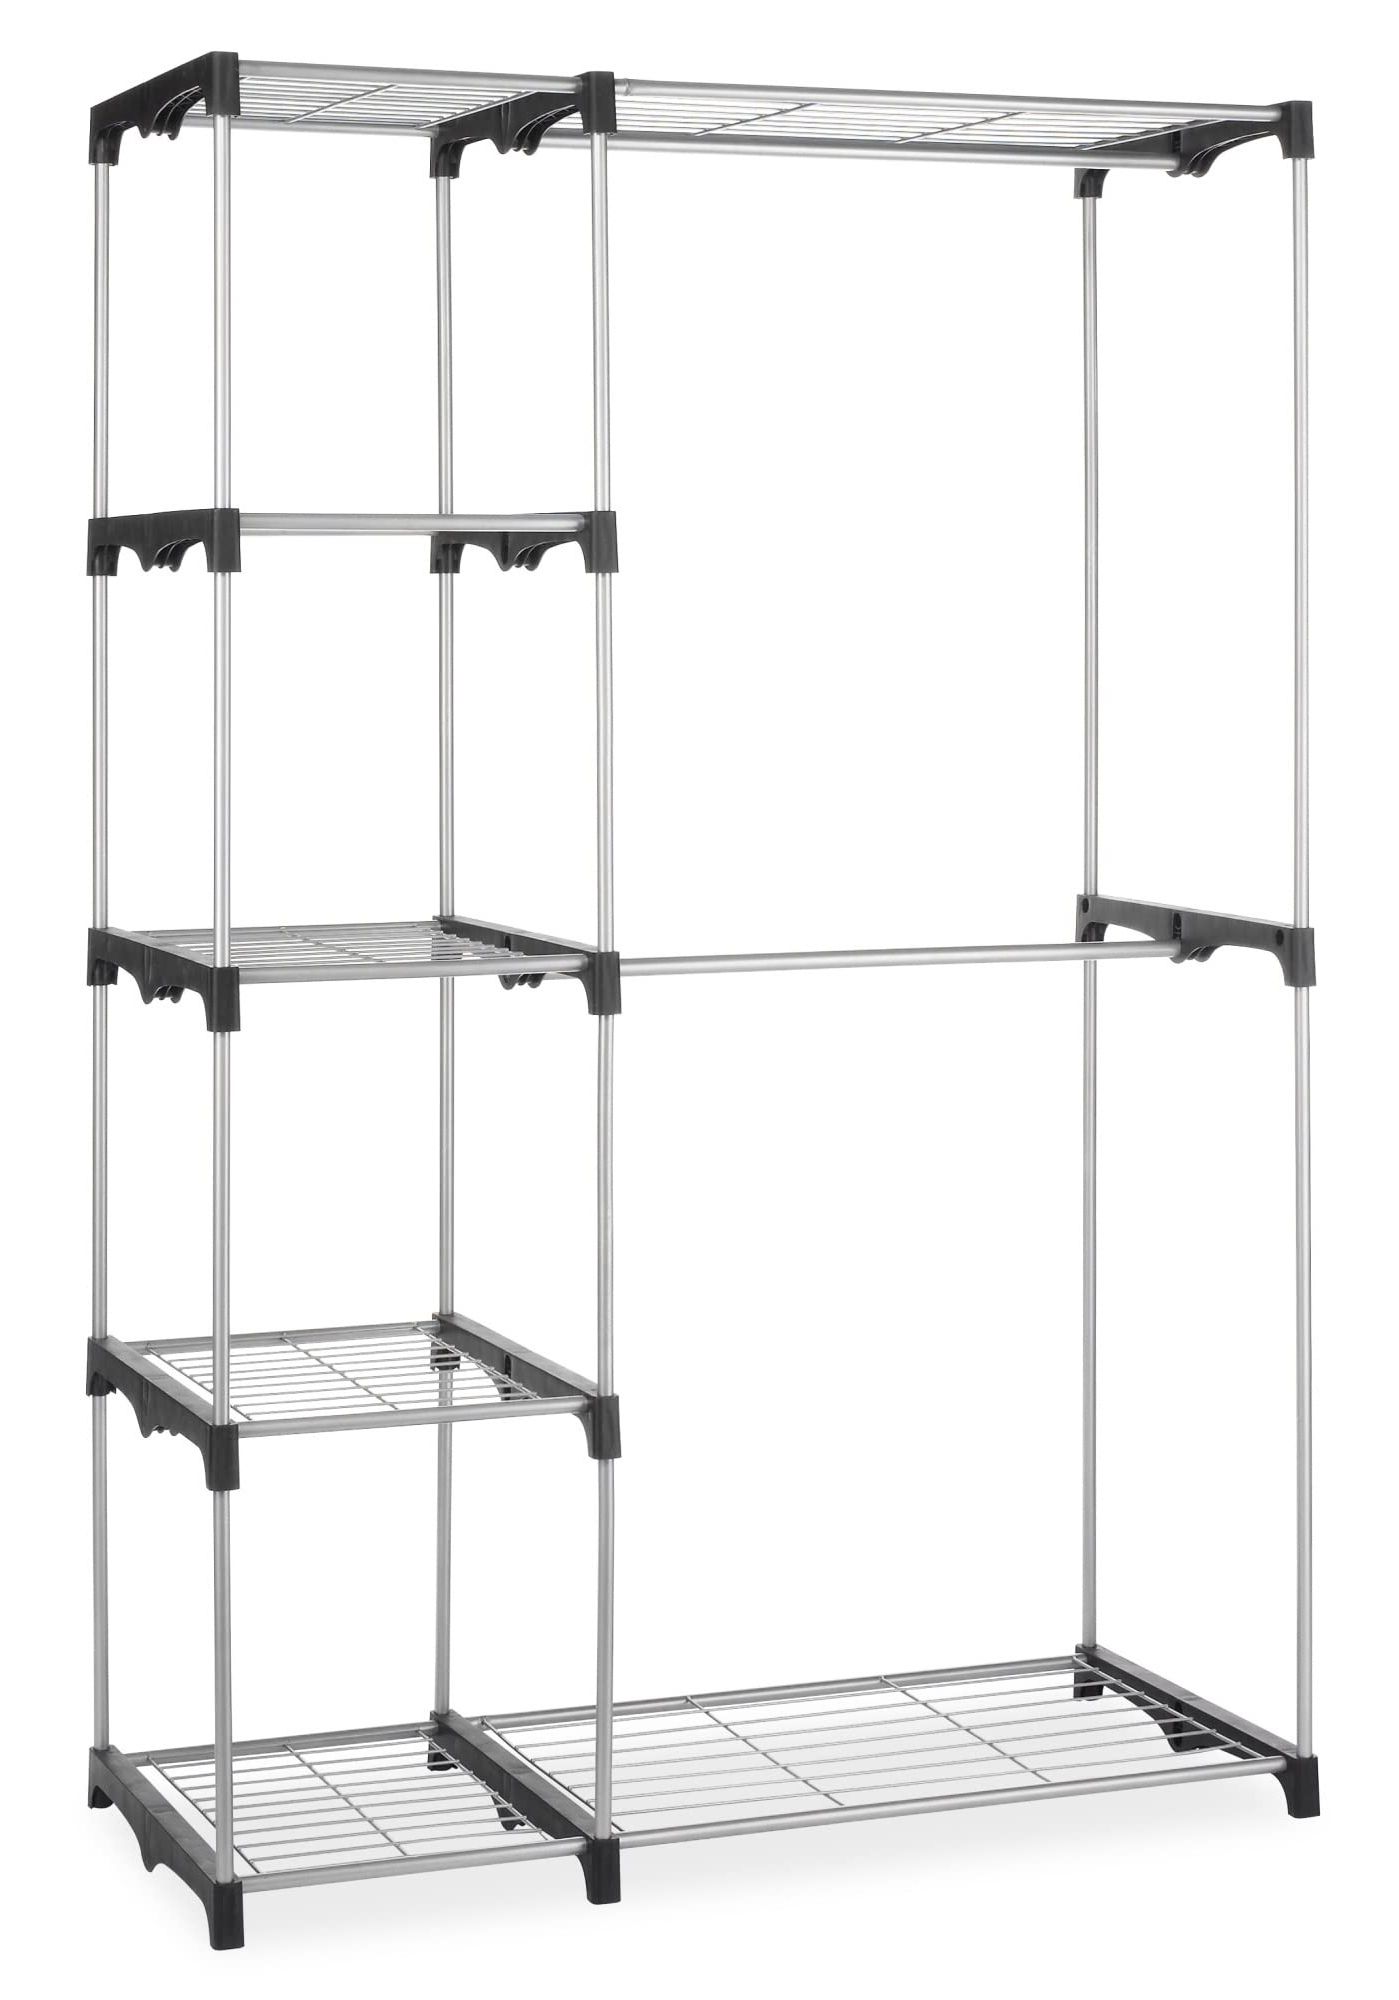 Most Popular Silver Metal Wardrobes Throughout Amazon: Fashionable And Practical Dual Pole Metal Wardrobe System With  High Strength Resin Connectors And Silver Black Color Scheme, Providing  Ultimate Storage Solution : Home & Kitchen (Photo 9 of 10)